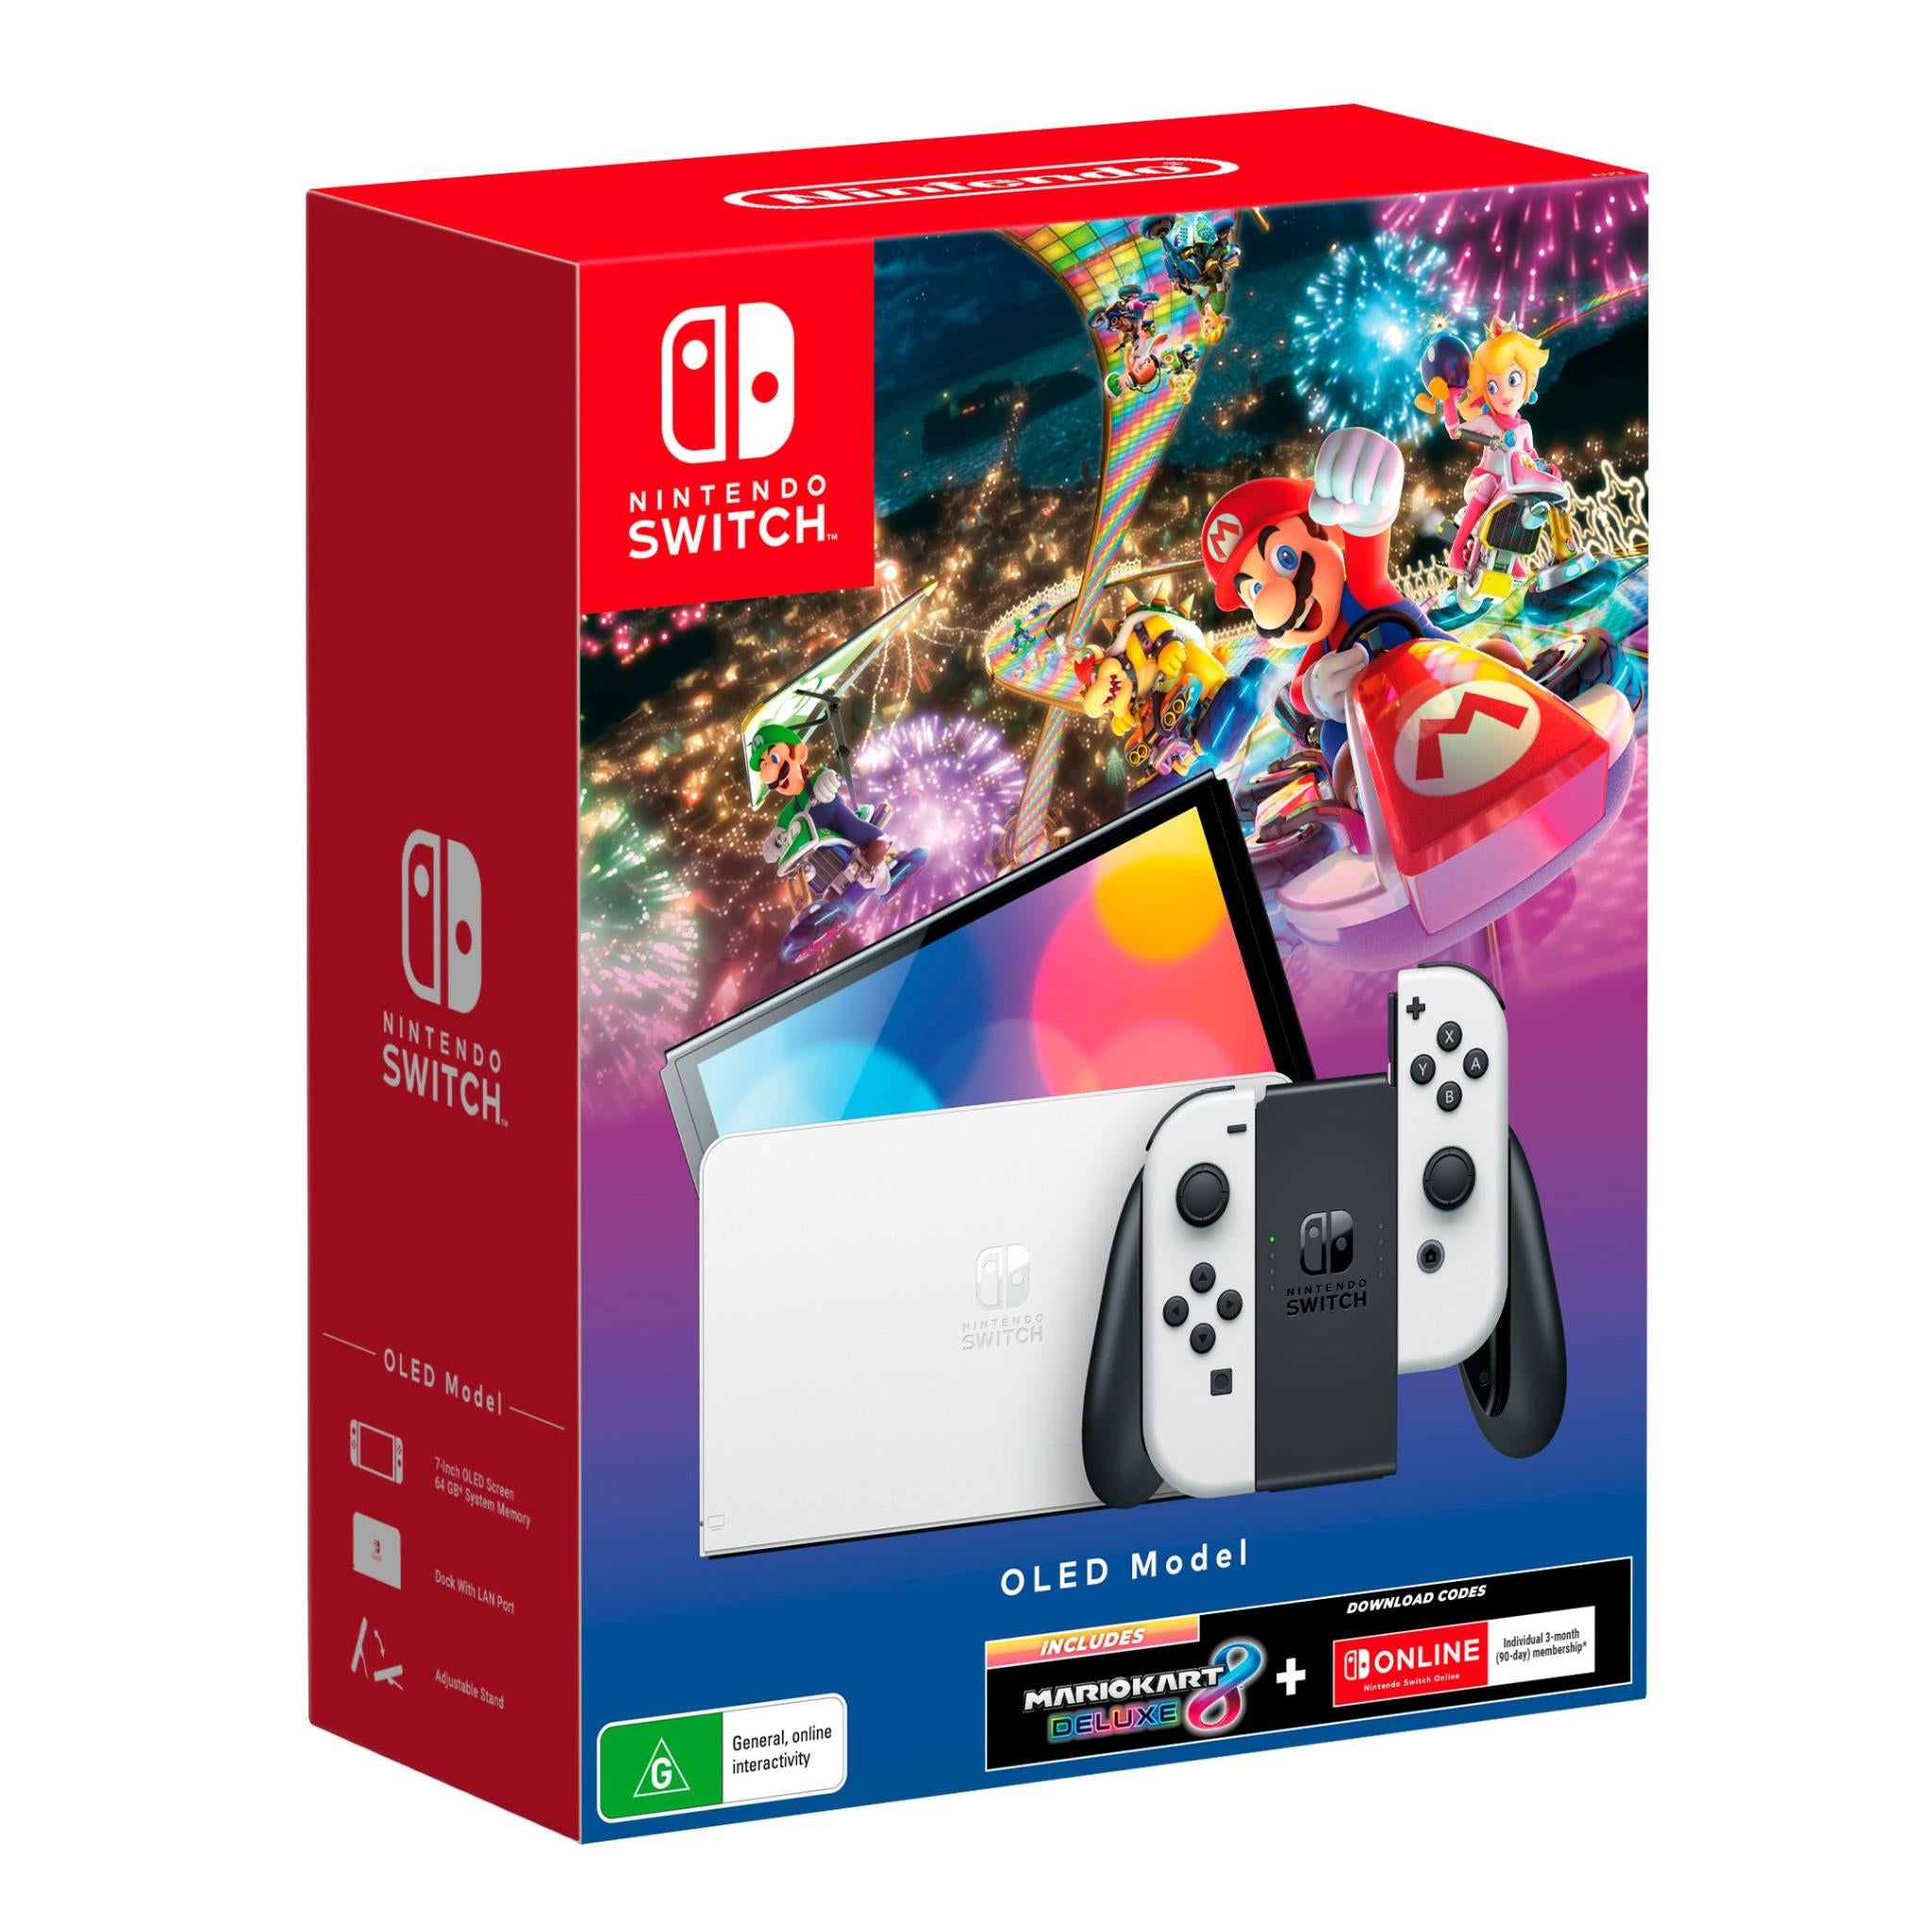 Nintendo Switch OLED Model White with Mario Kart 8 Deluxe & Switch